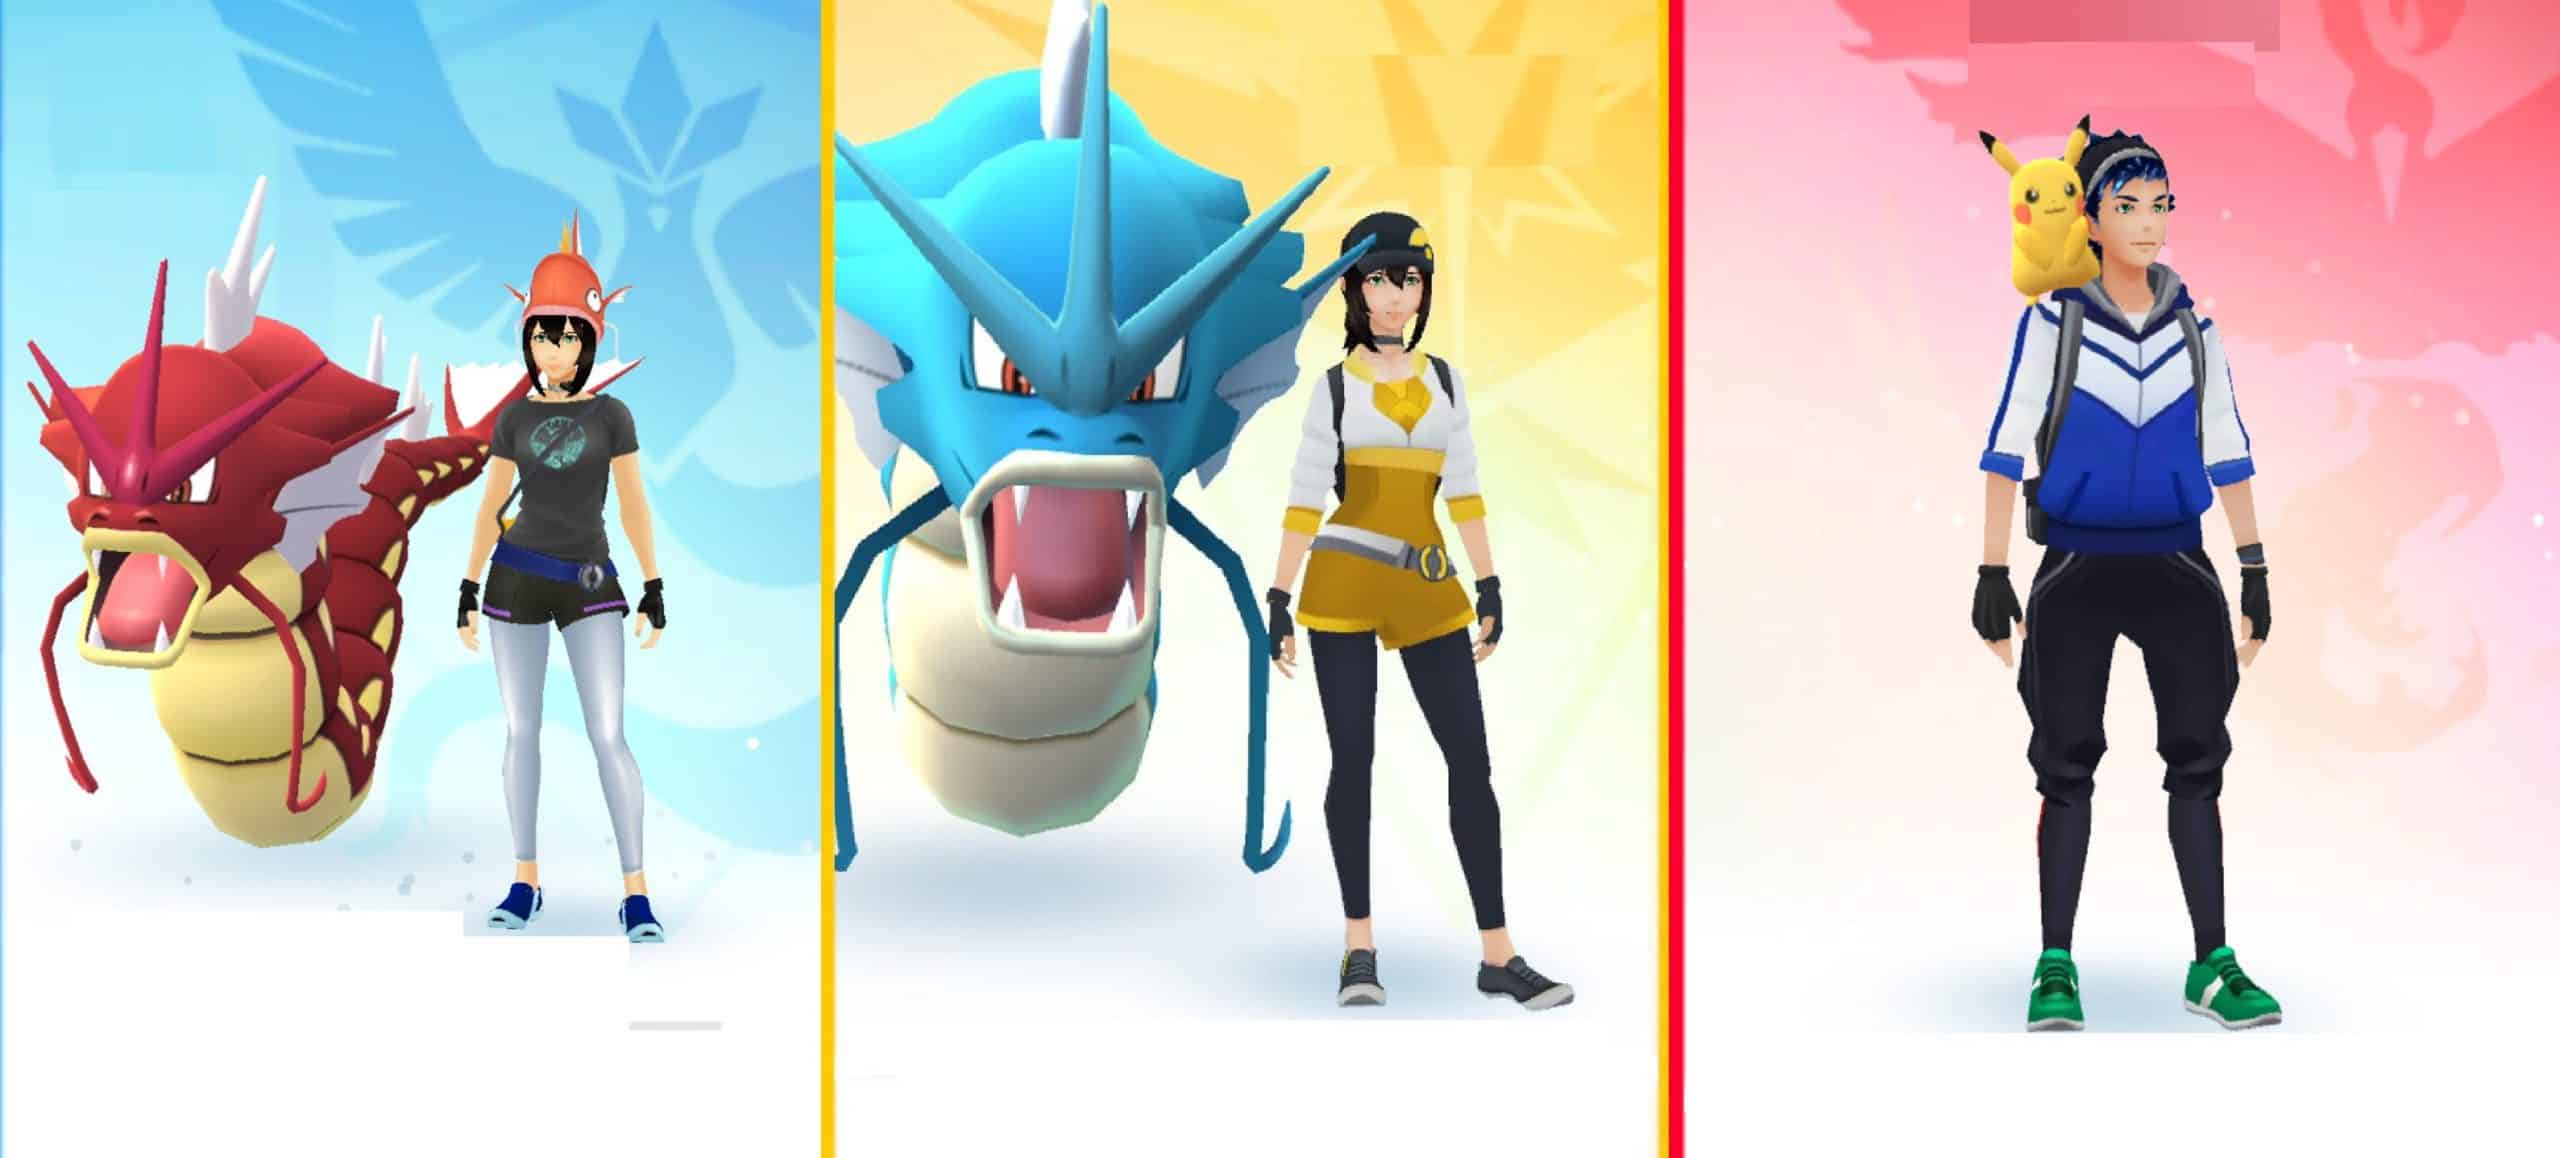 How to play with your Buddy in Pokémon Go